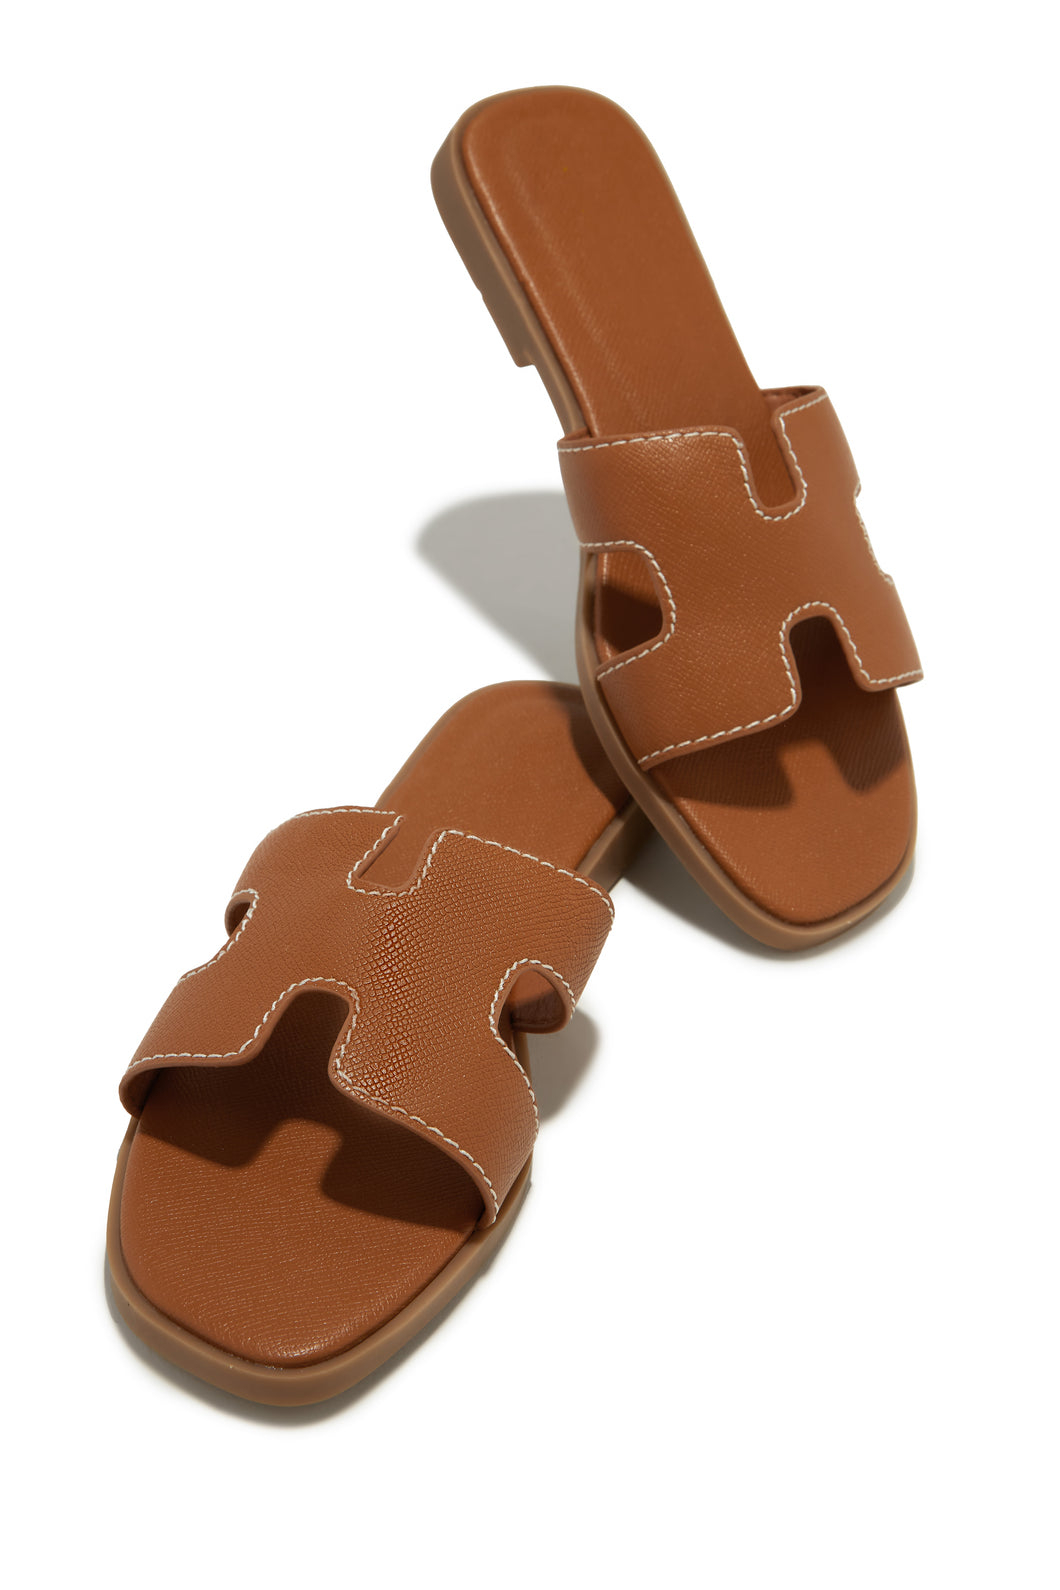 Lucy Slip On Sandals - Tan